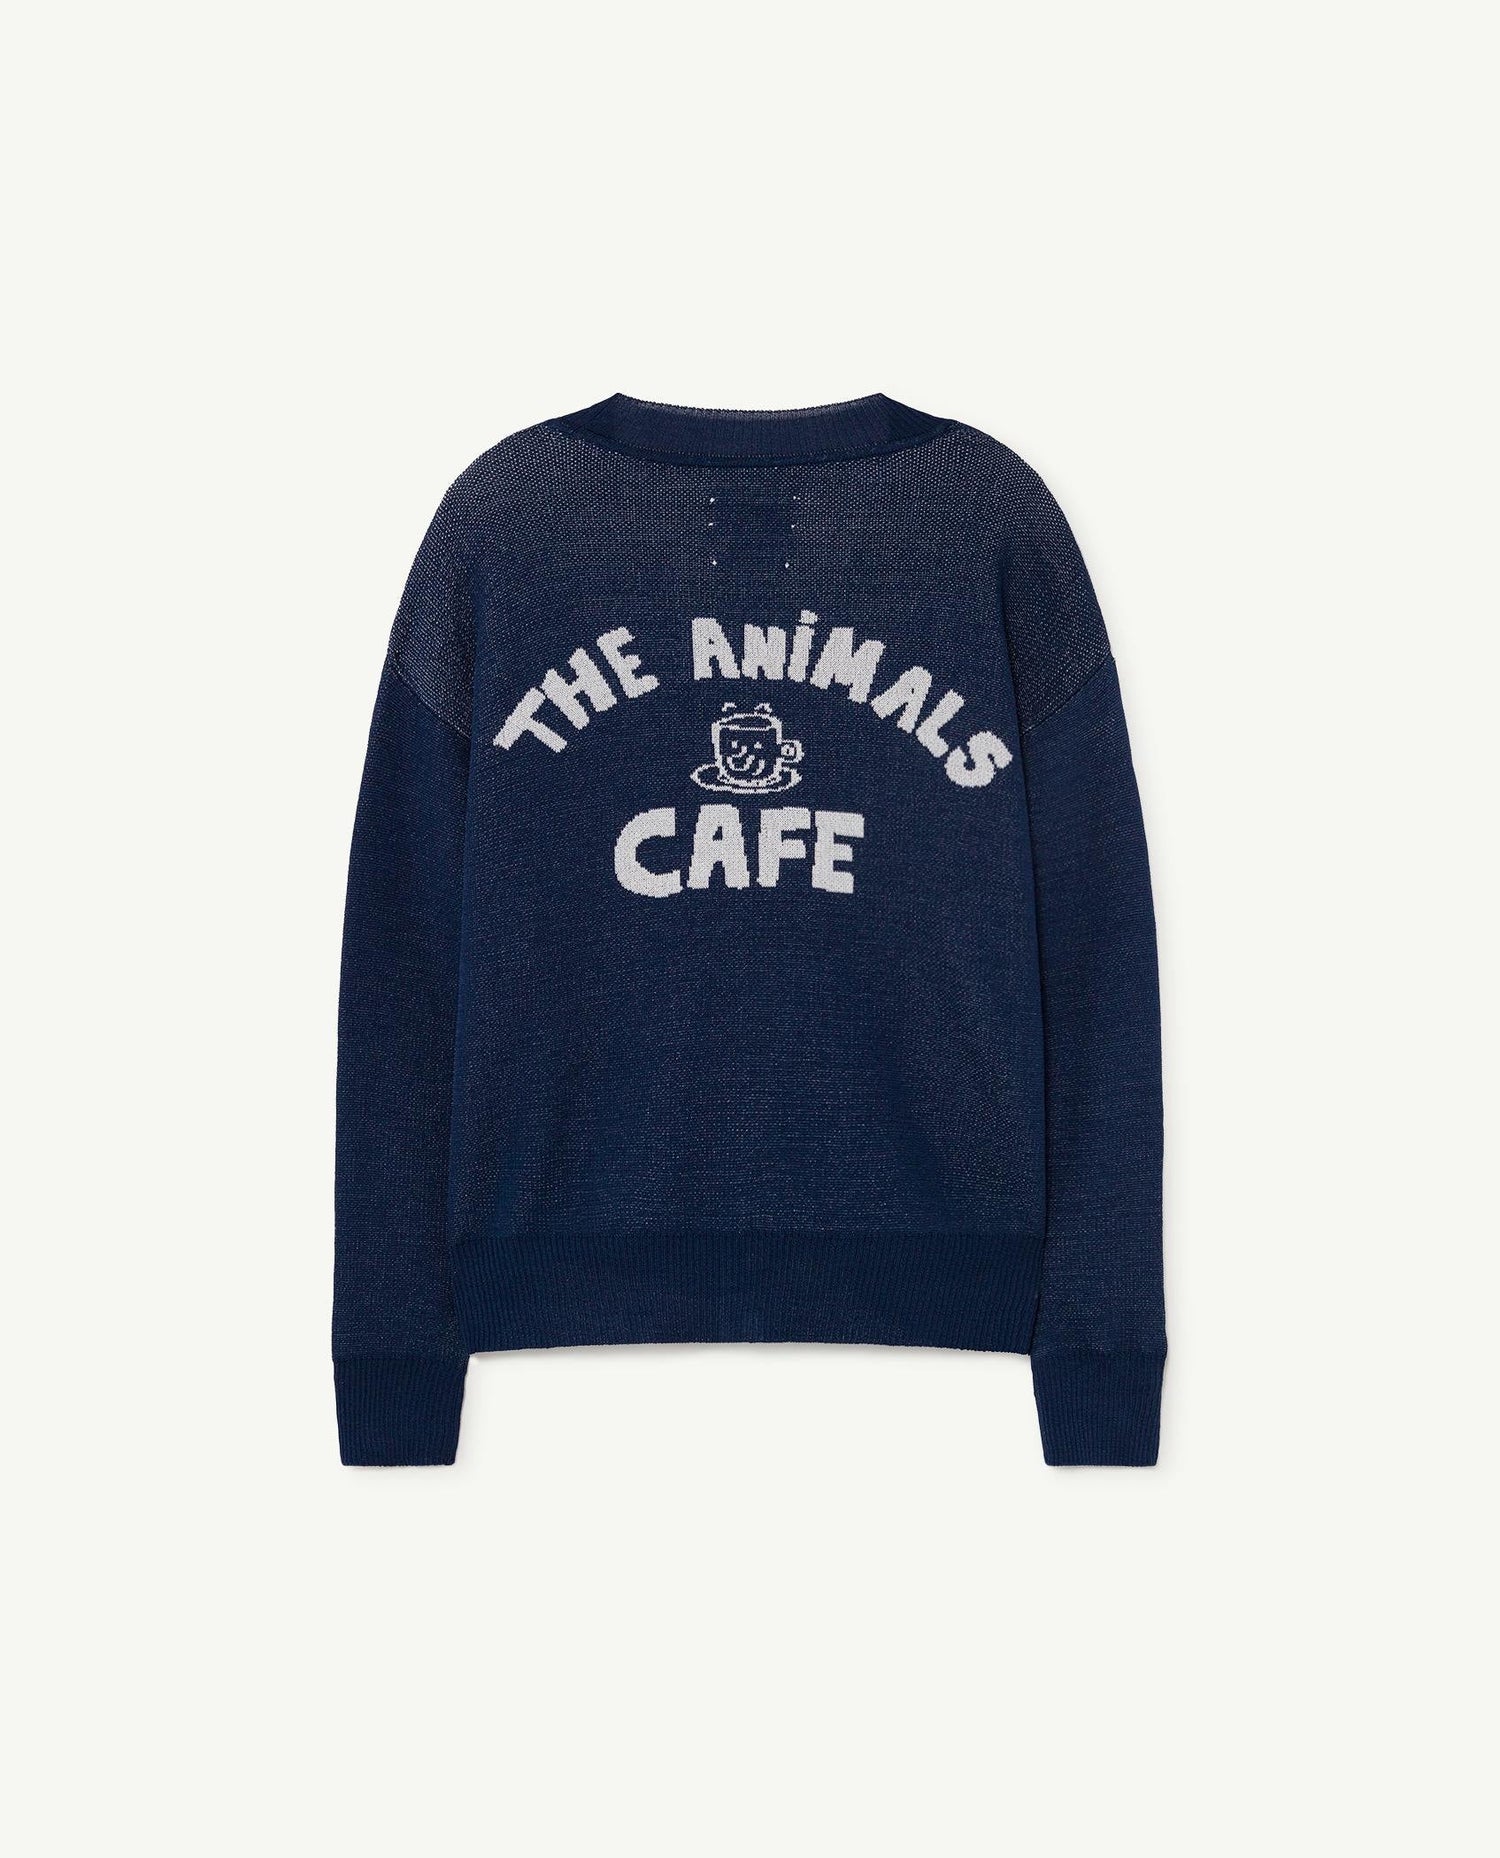 Plain Racoon Cardigan navy Knitwear The Animals Observatory 